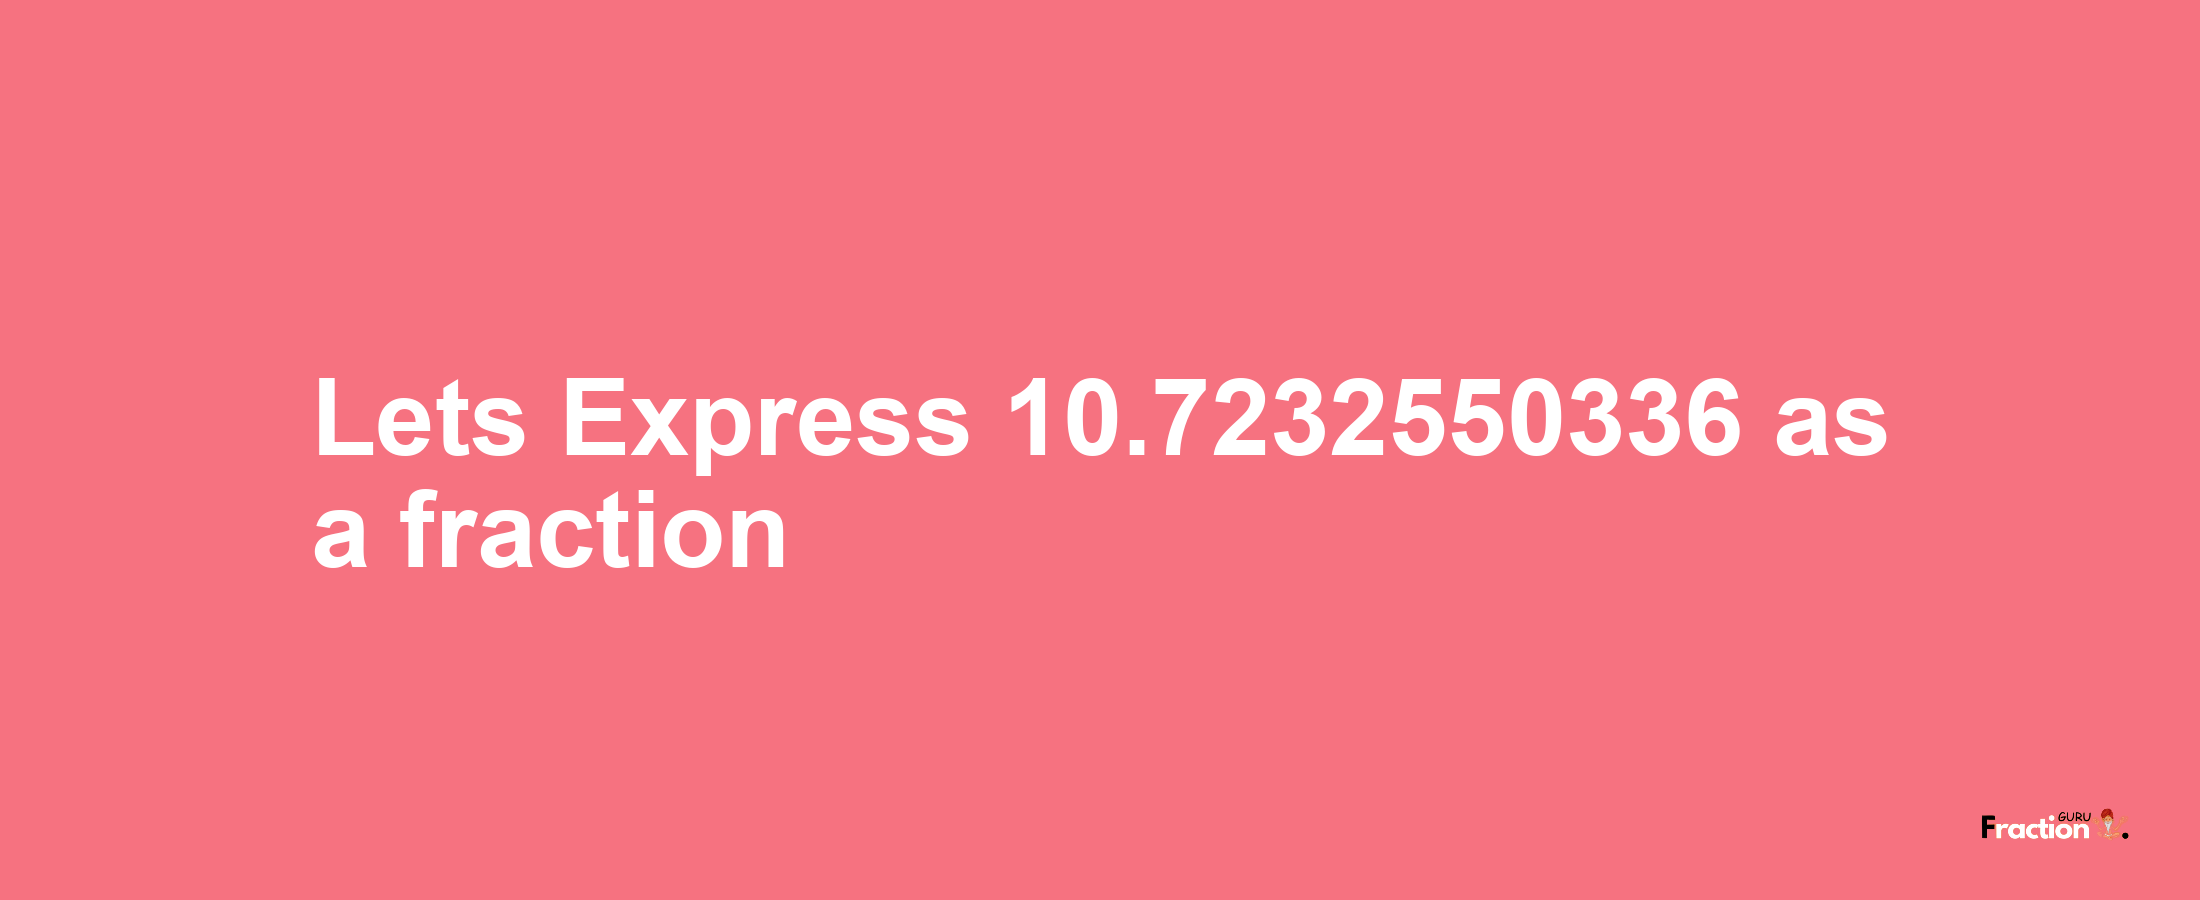 Lets Express 10.7232550336 as afraction